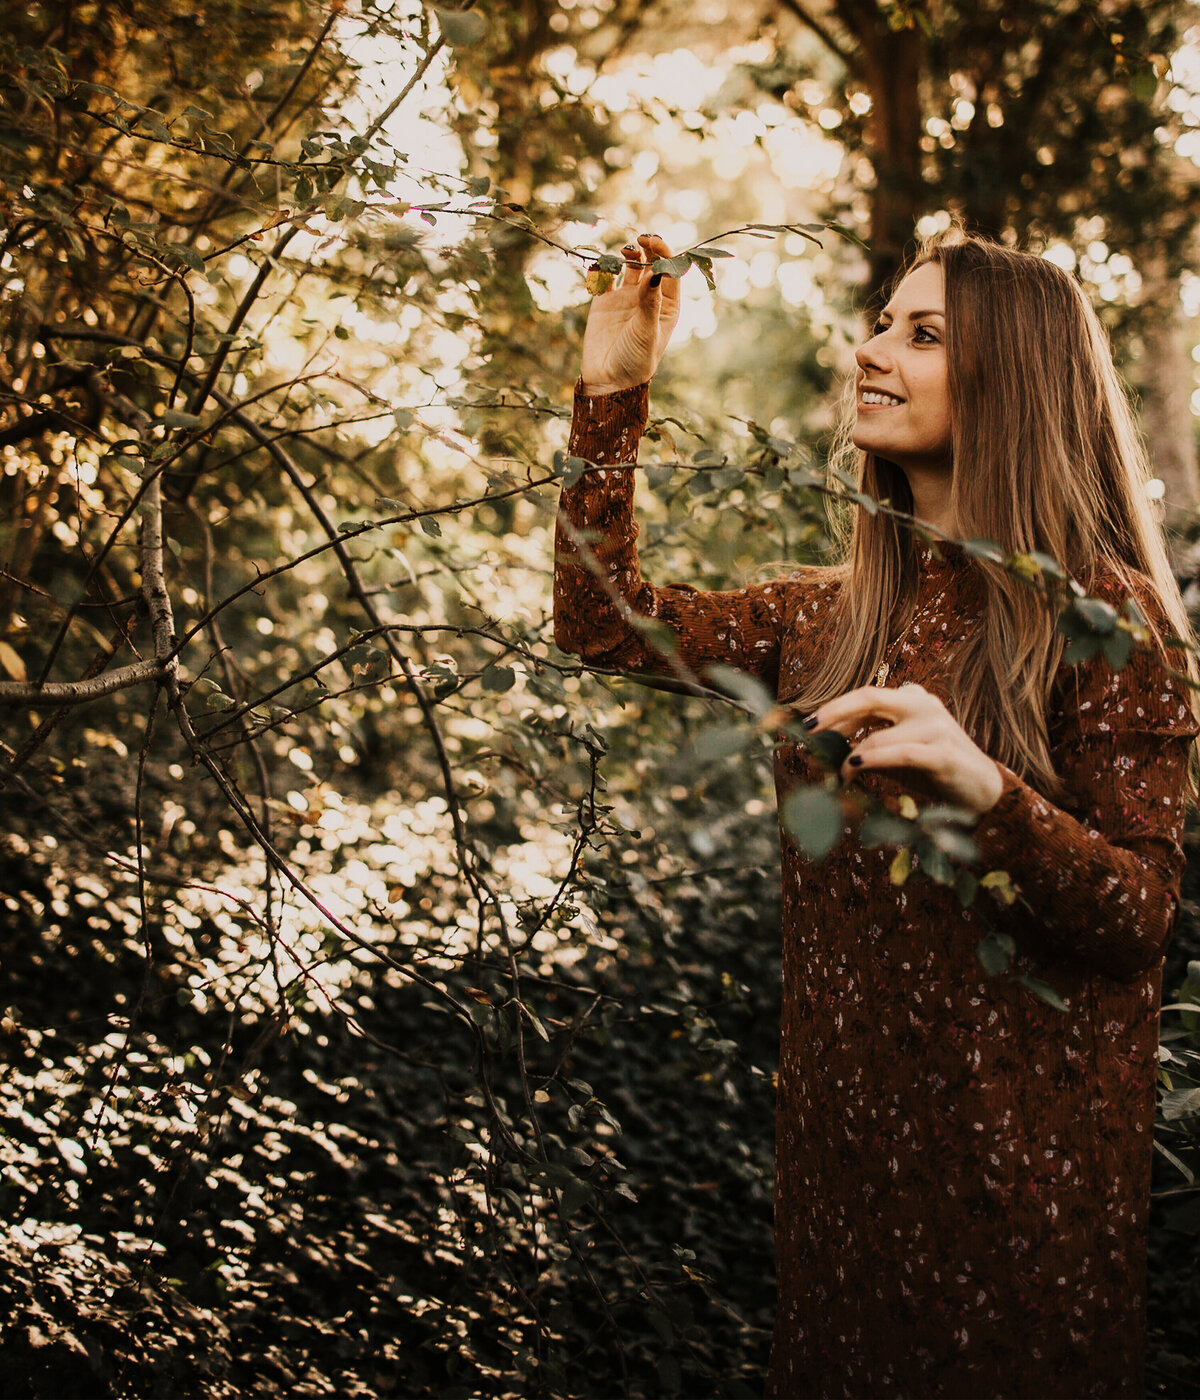 Barbora is surrounded by trees. She smiles and touches a branch